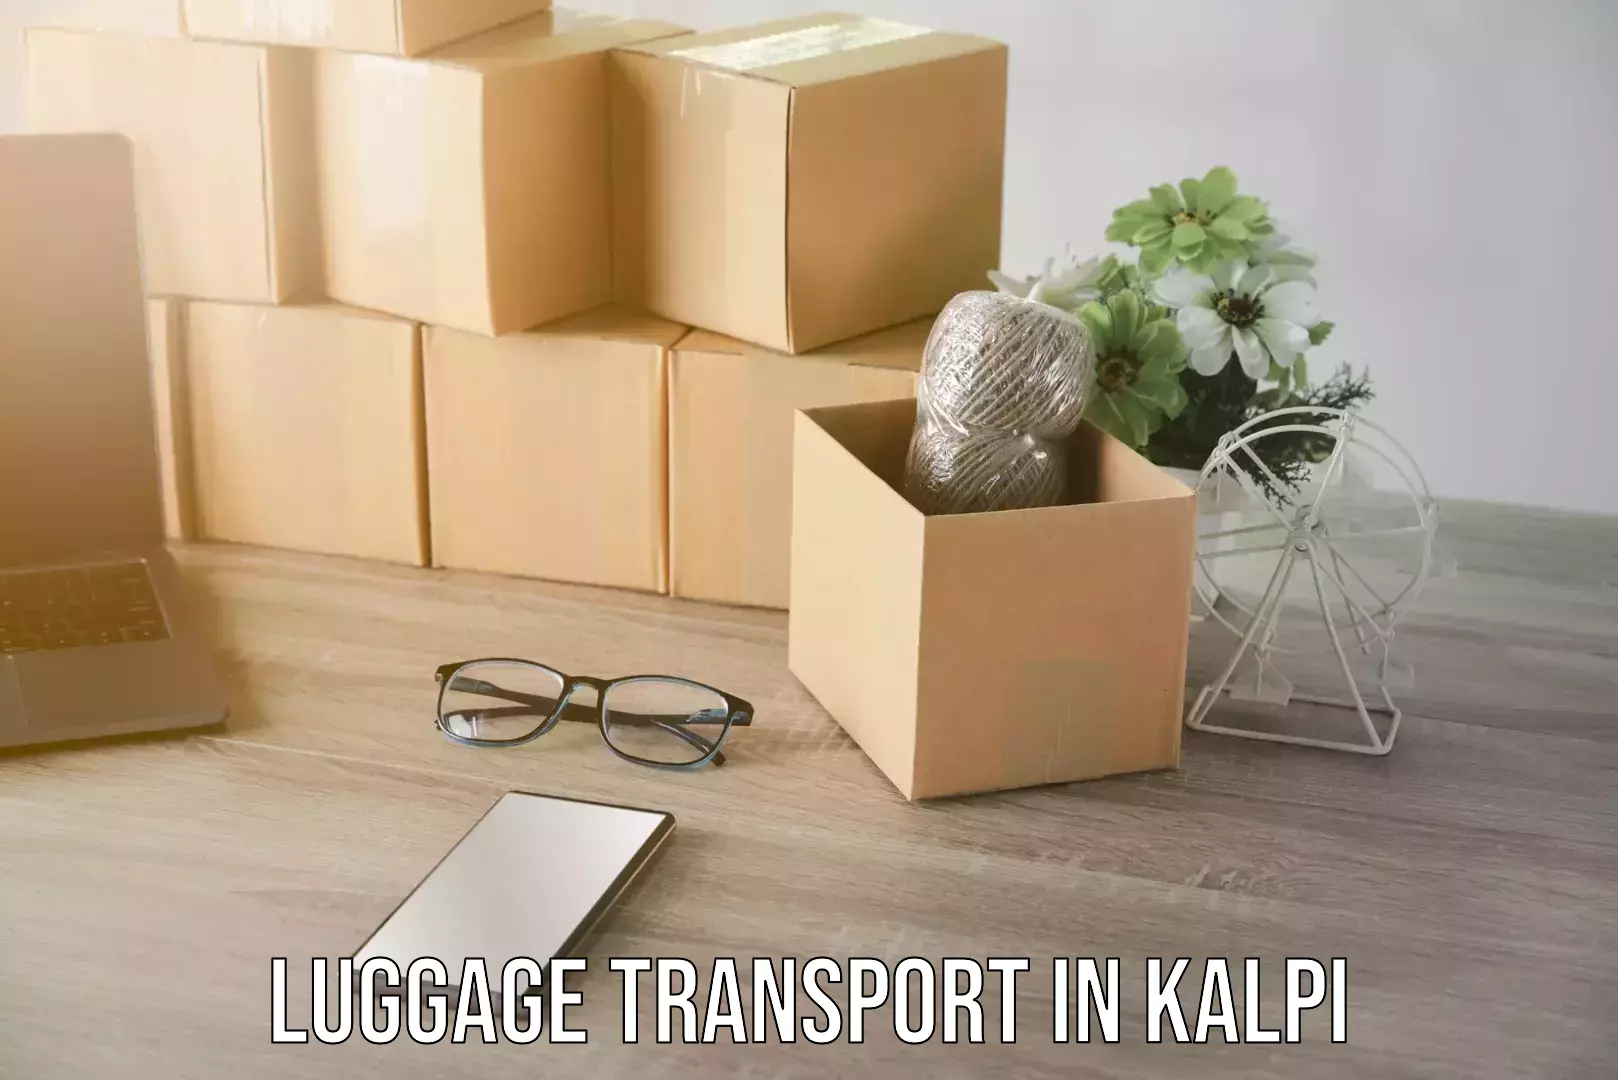 Hassle-free luggage shipping in Kalpi